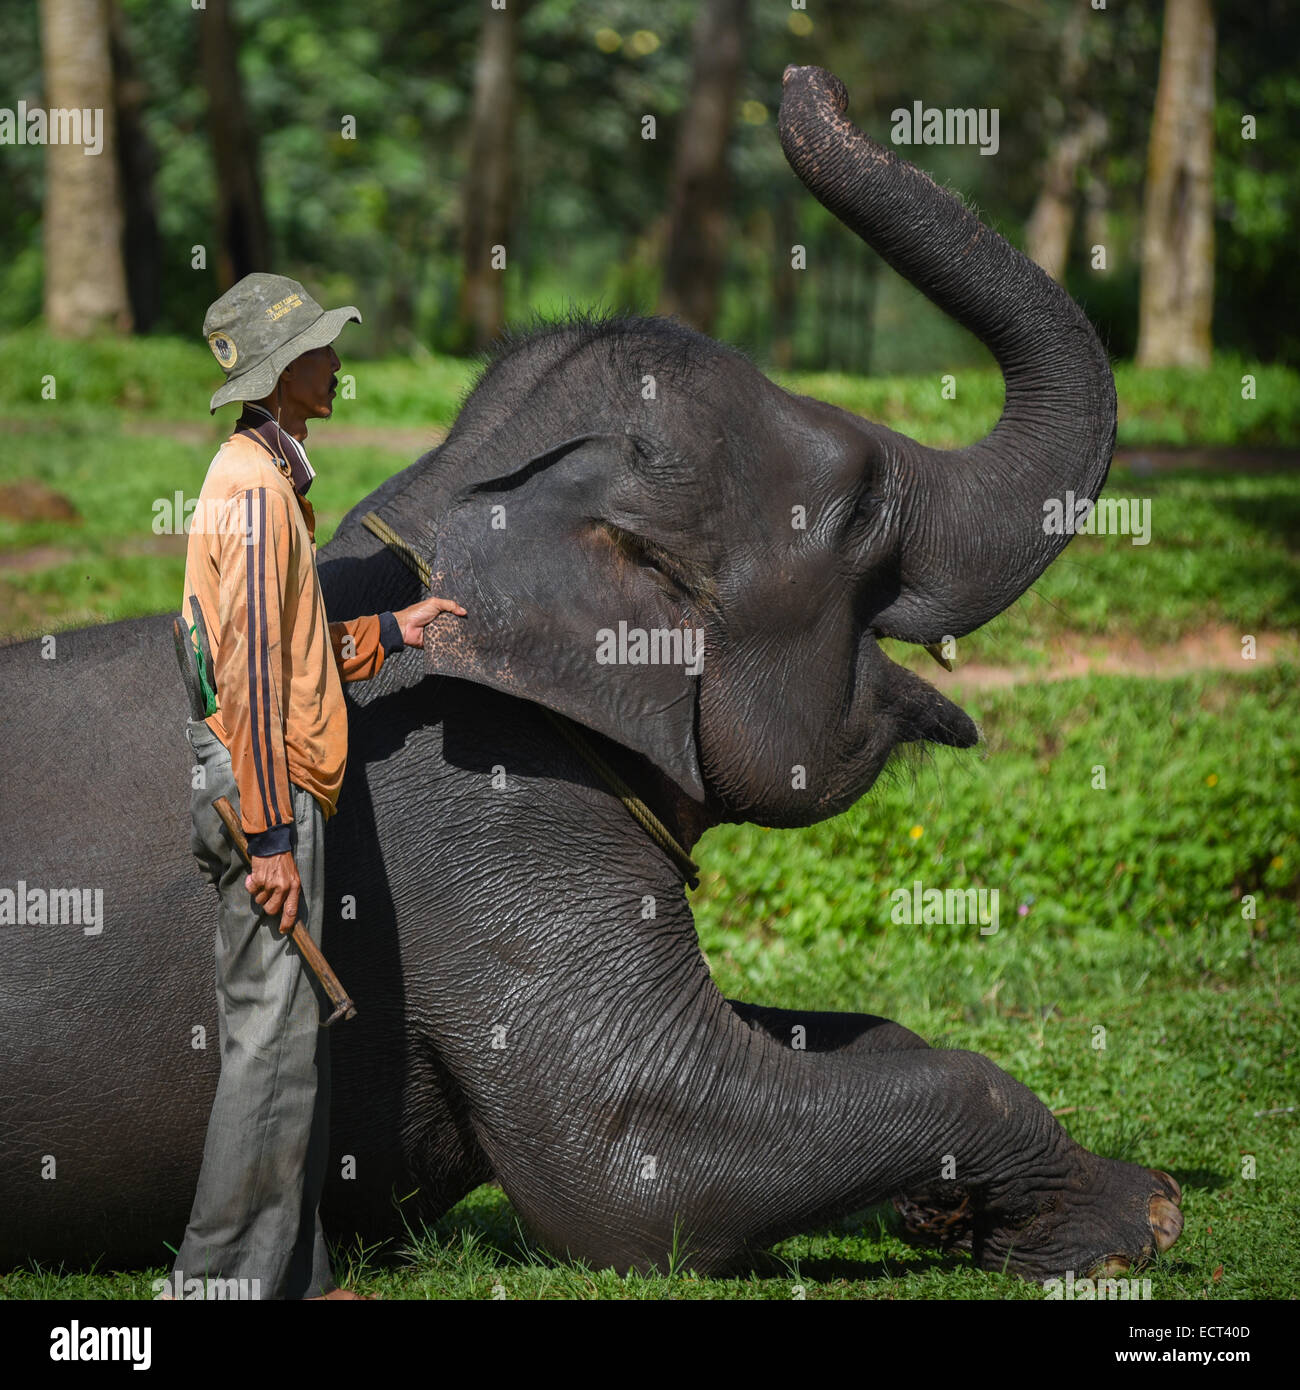 A mahout (elephant keeper) poses with an elephant in Way Kambas National Park, Indonesia. Stock Photo